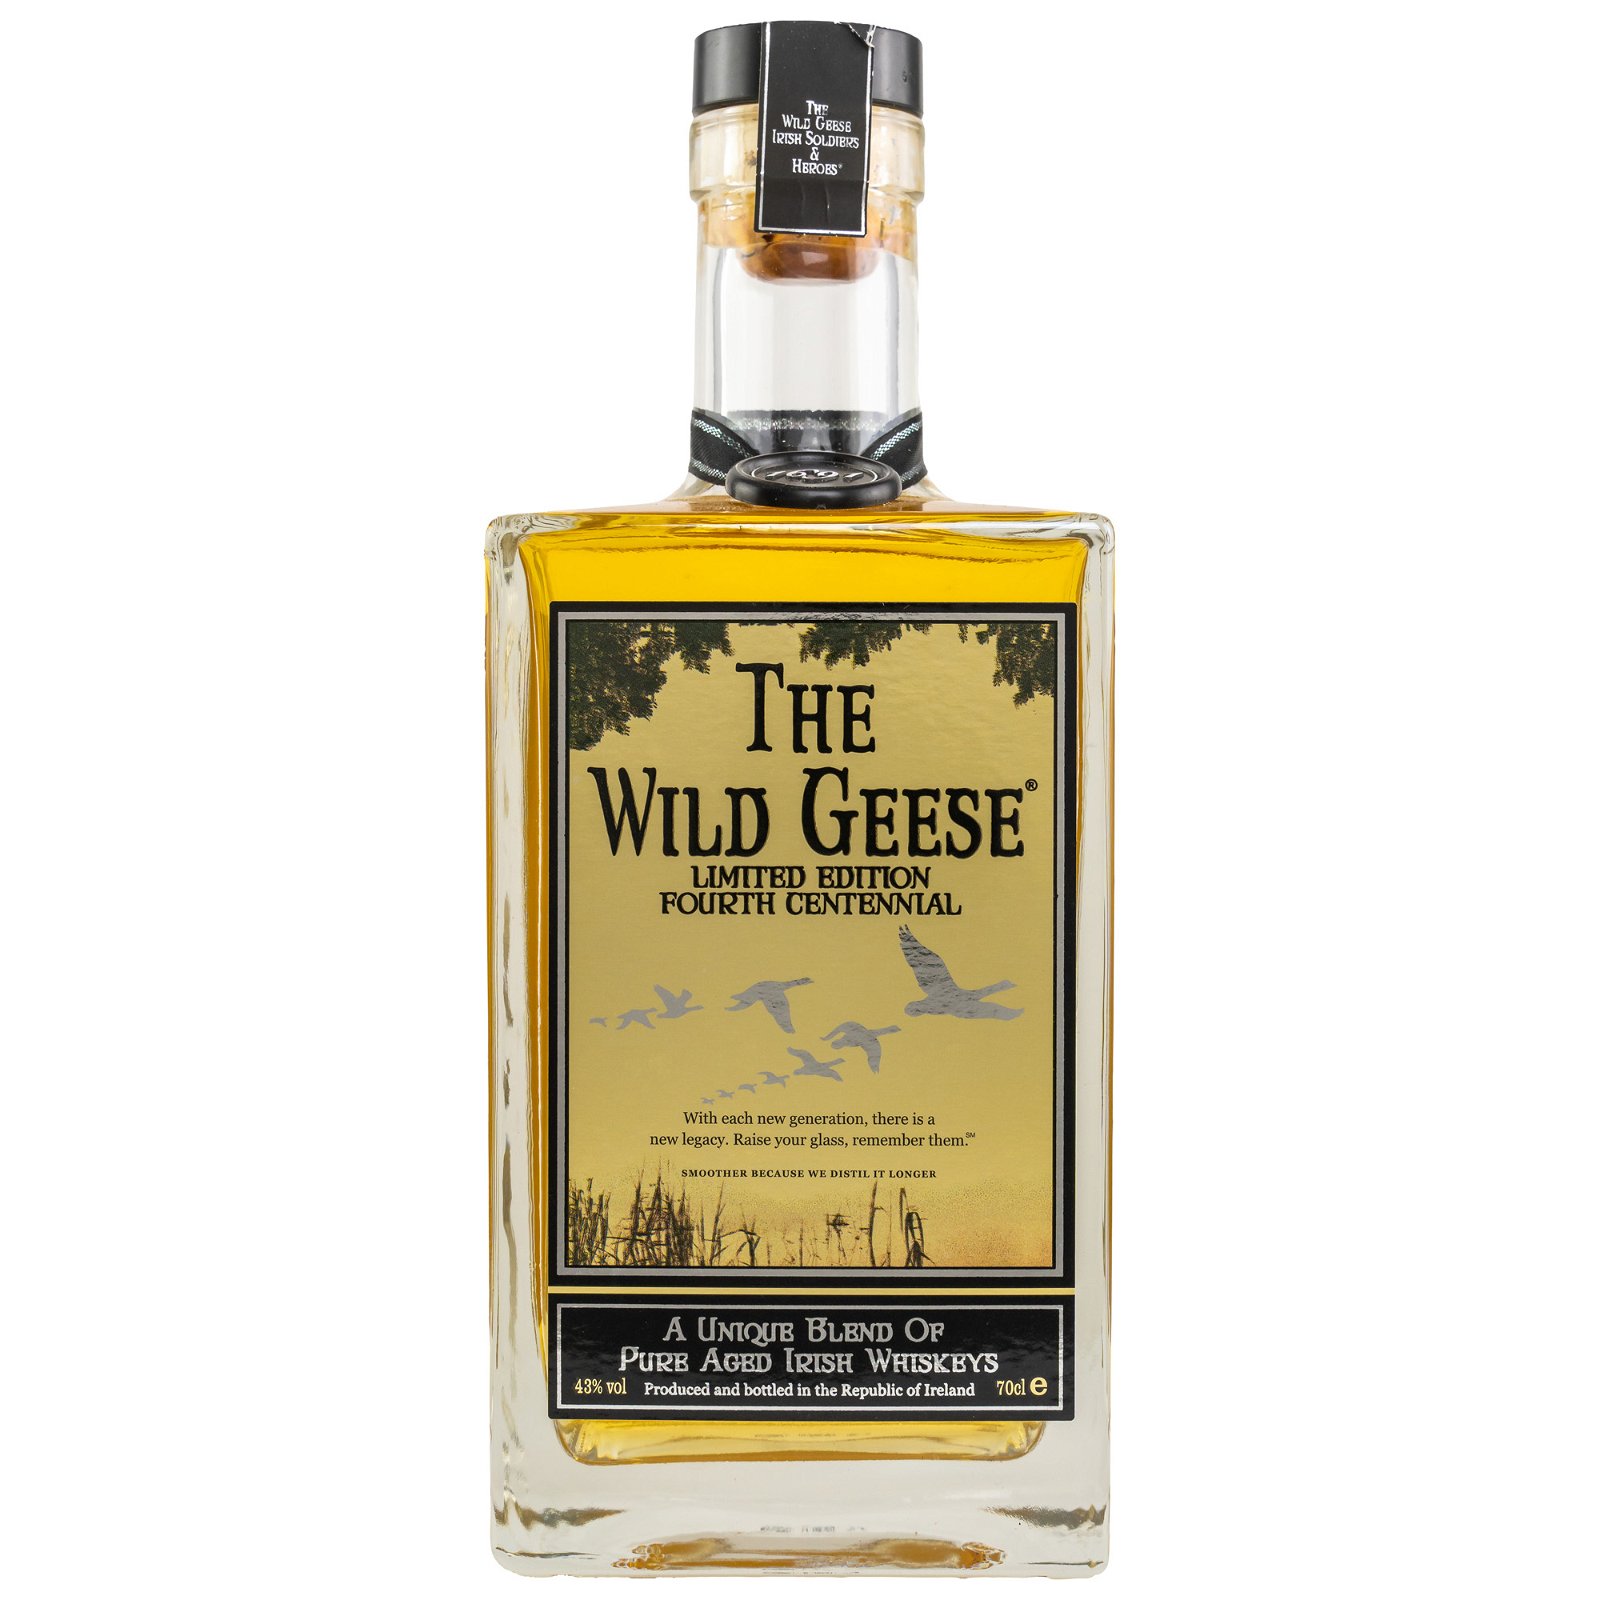 The Wild Geese Limited Edition Fourth Centennial 